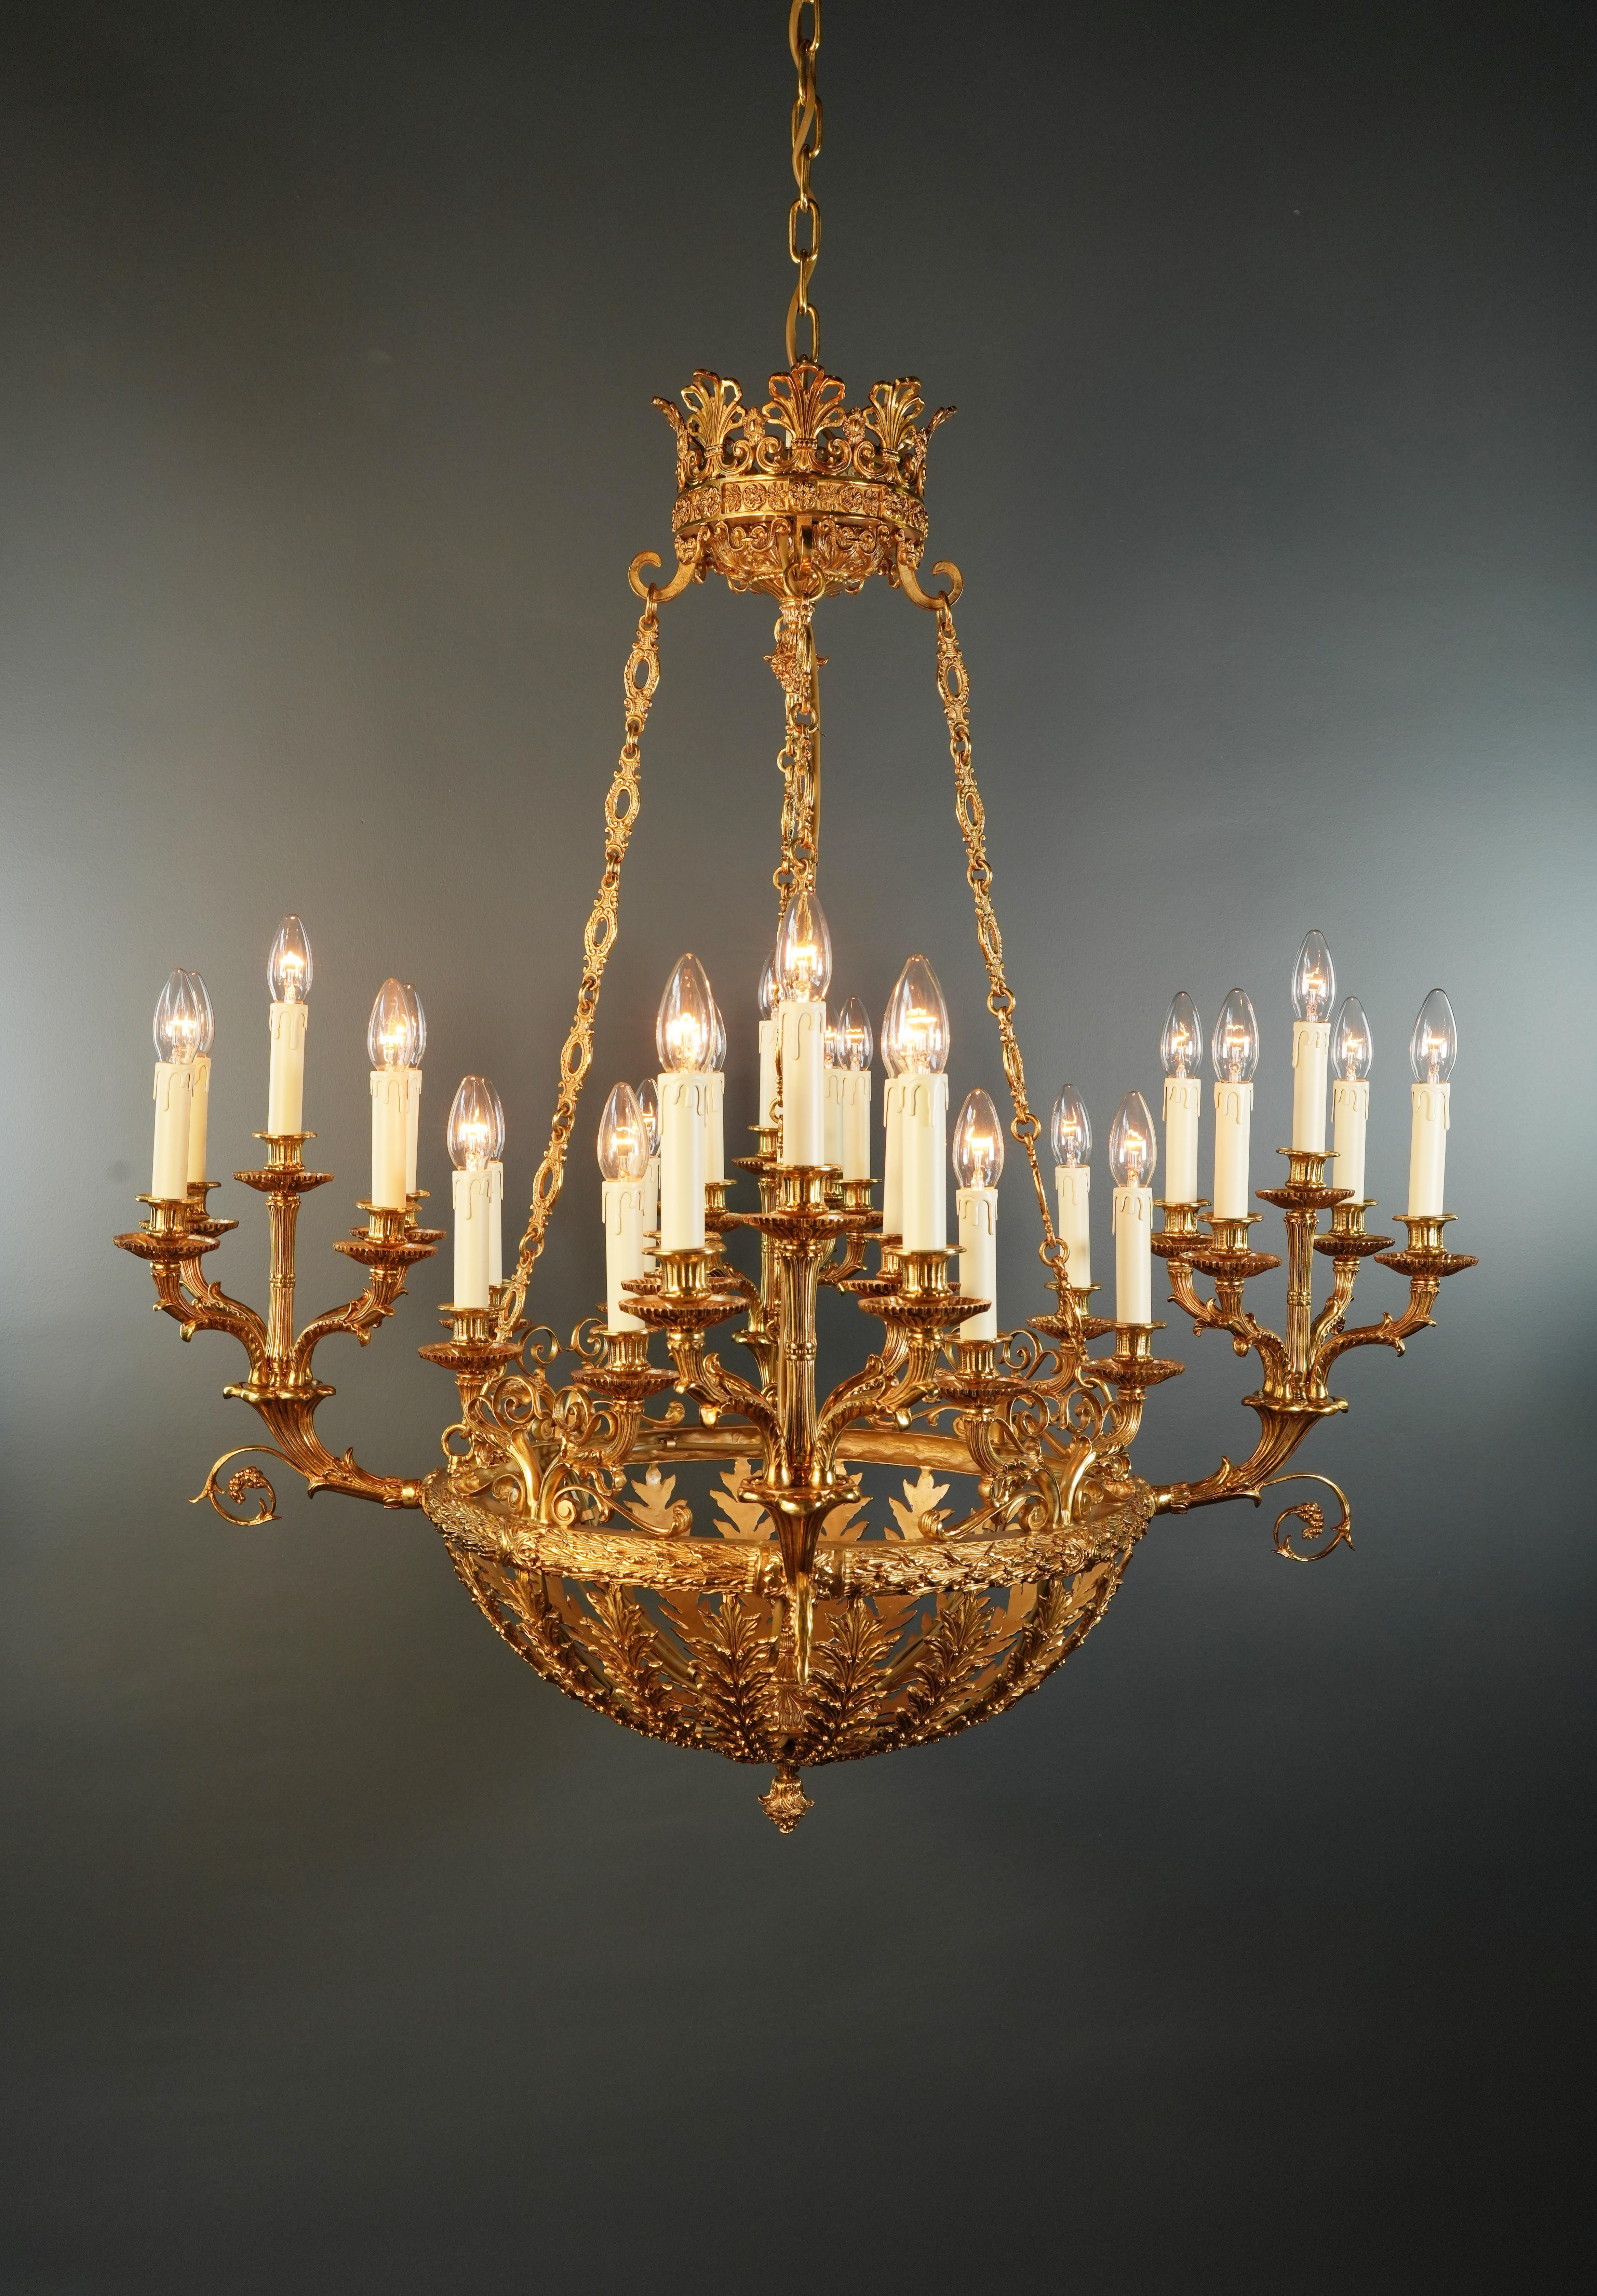 Introducing a stunning Baroque Empire brass chandelier, an exquisite piece with fascinating embellishments reminiscent of the classic style of the Empire era. This is a new reproduction and there are several available to ensure you can bring this